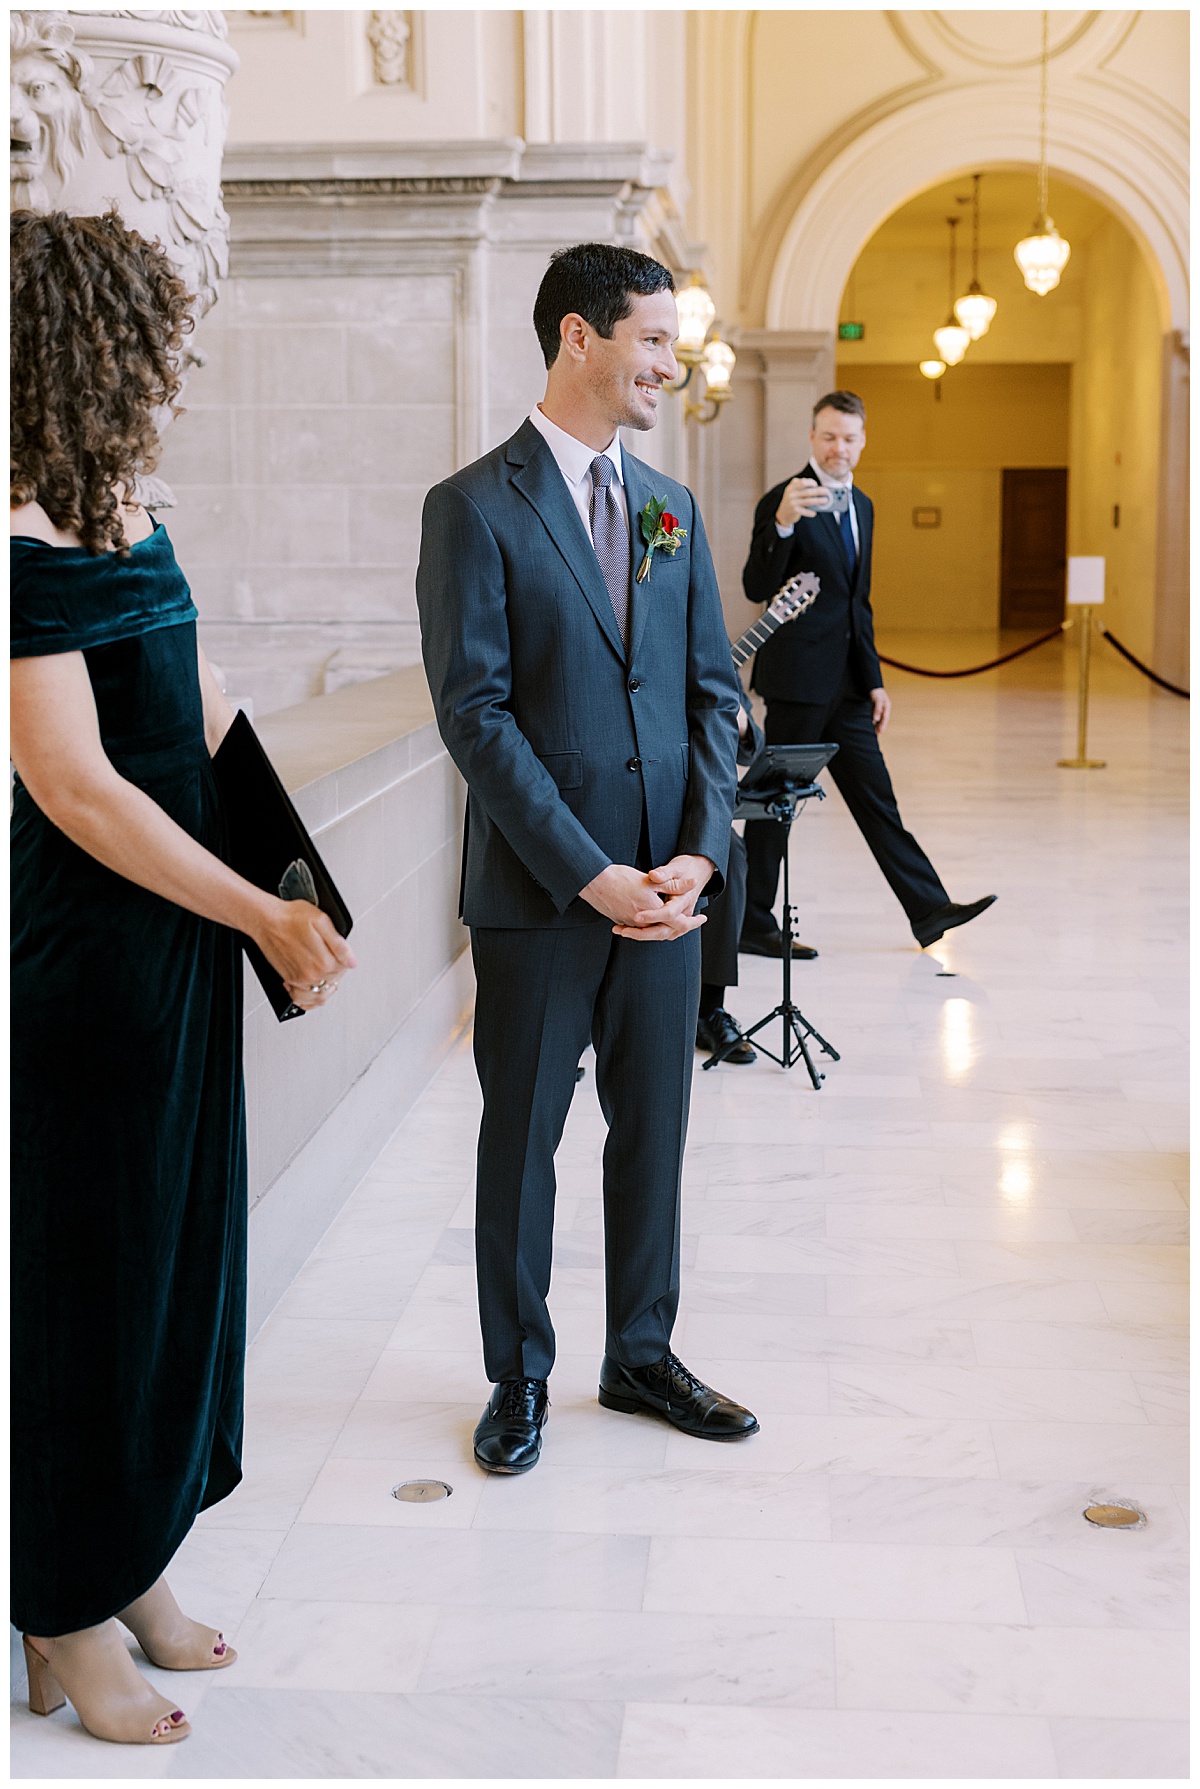 Nick waiting for Hillary for their vintage glam SF City Hall wedding